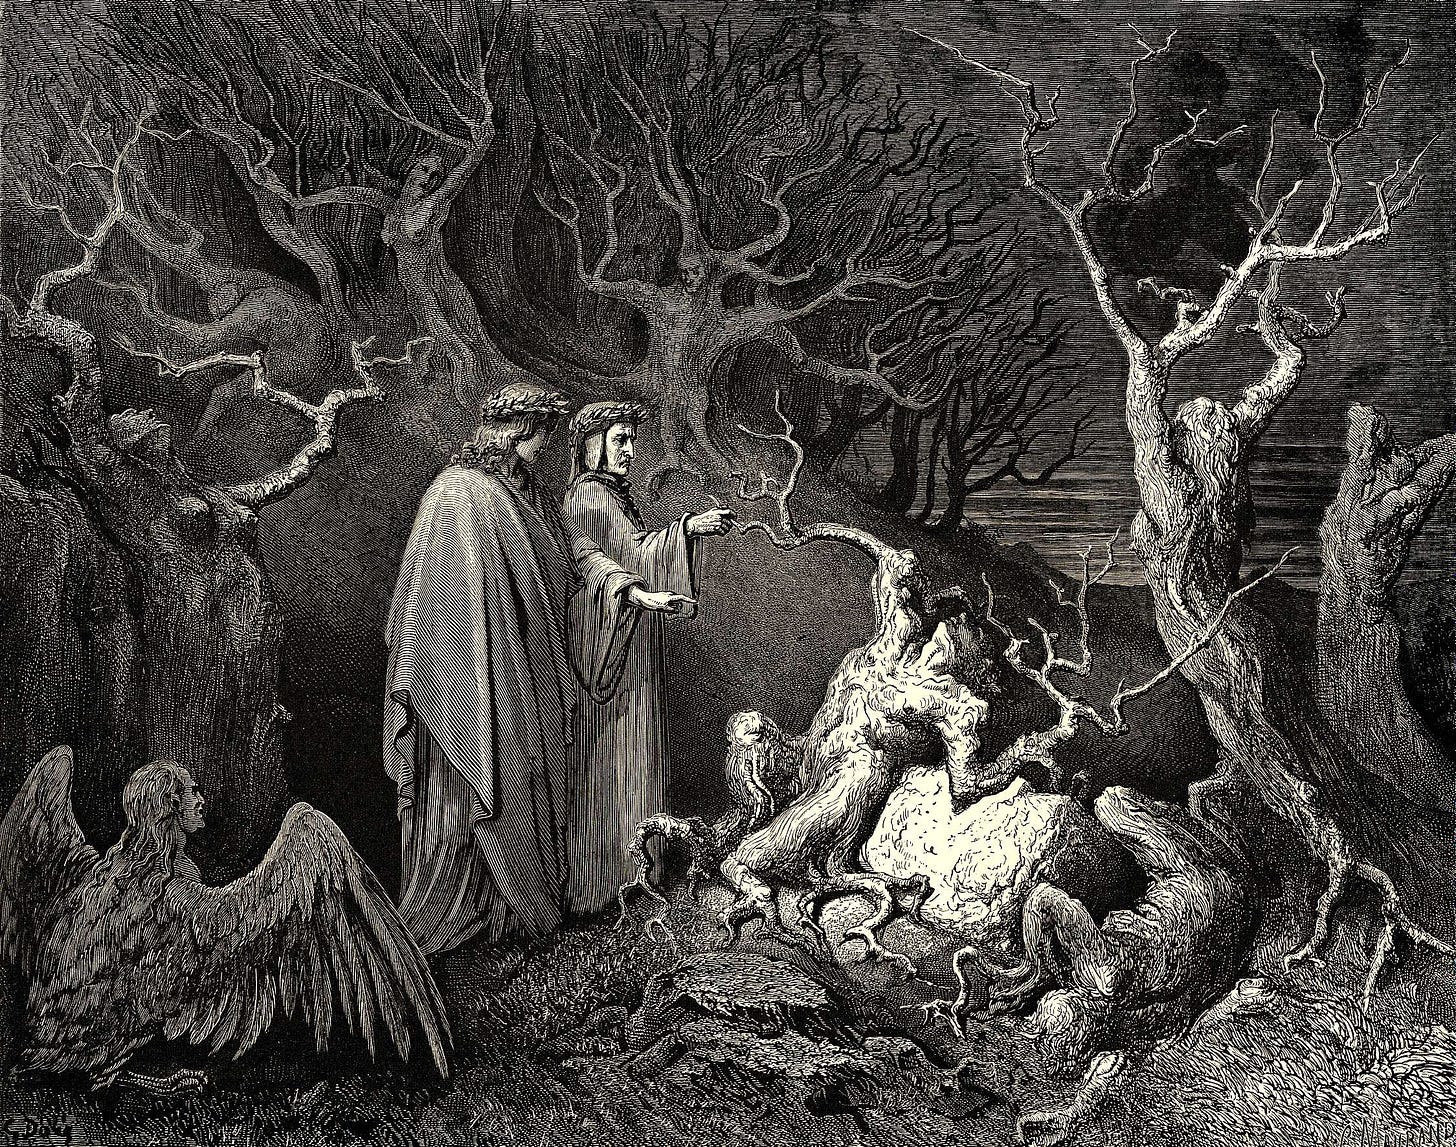 https://uploads3.wikiart.org/images/gustave-dore/the-inferno-canto-13.jpg